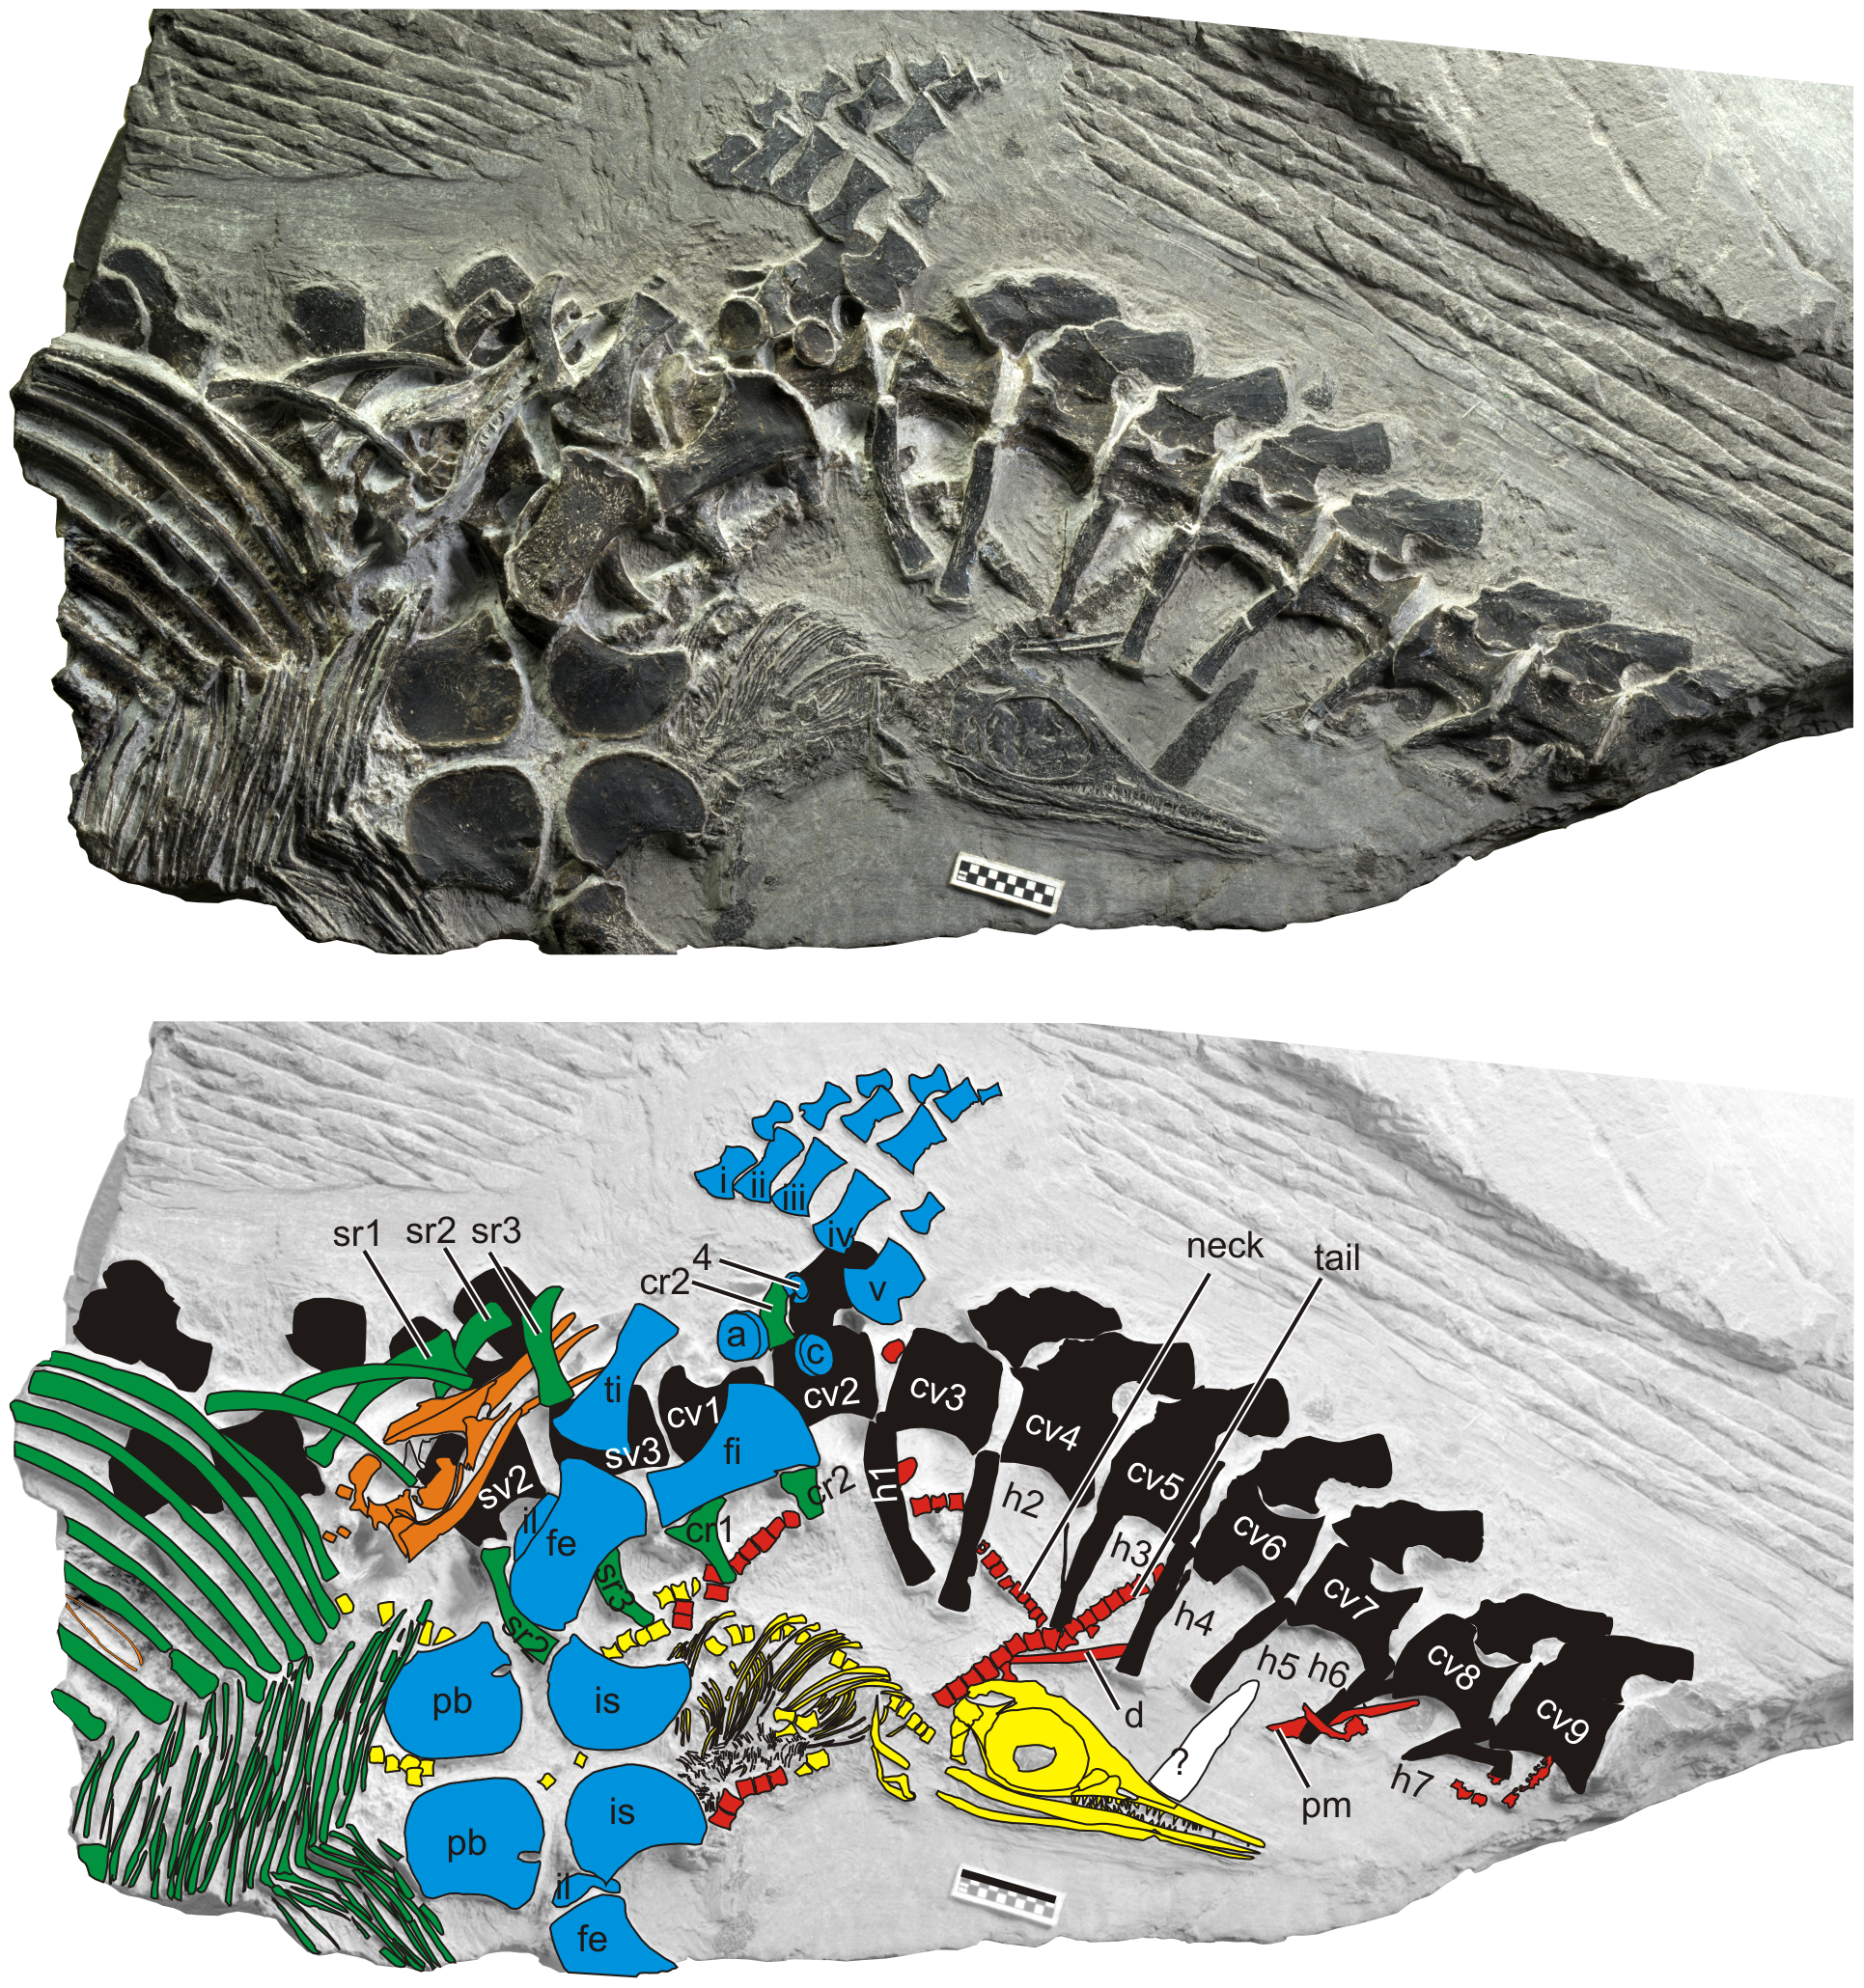 The color-coded diagram, from the PLOS One paper, illustrates important features of the ichthyosaur fossils. Black: mother's vertebral column (backbone); blue: mother's pelvis and hind flipper; green: mother's rib bones; orange: embryo inside its mother; yellow: a baby being born head-first; red: remains of the baby already born. The scale bar below the yellow skull is 1 cm (0.4 inches). Image credit: Ryosuke Motani, doi:10.1371/journal.pone.0088640.